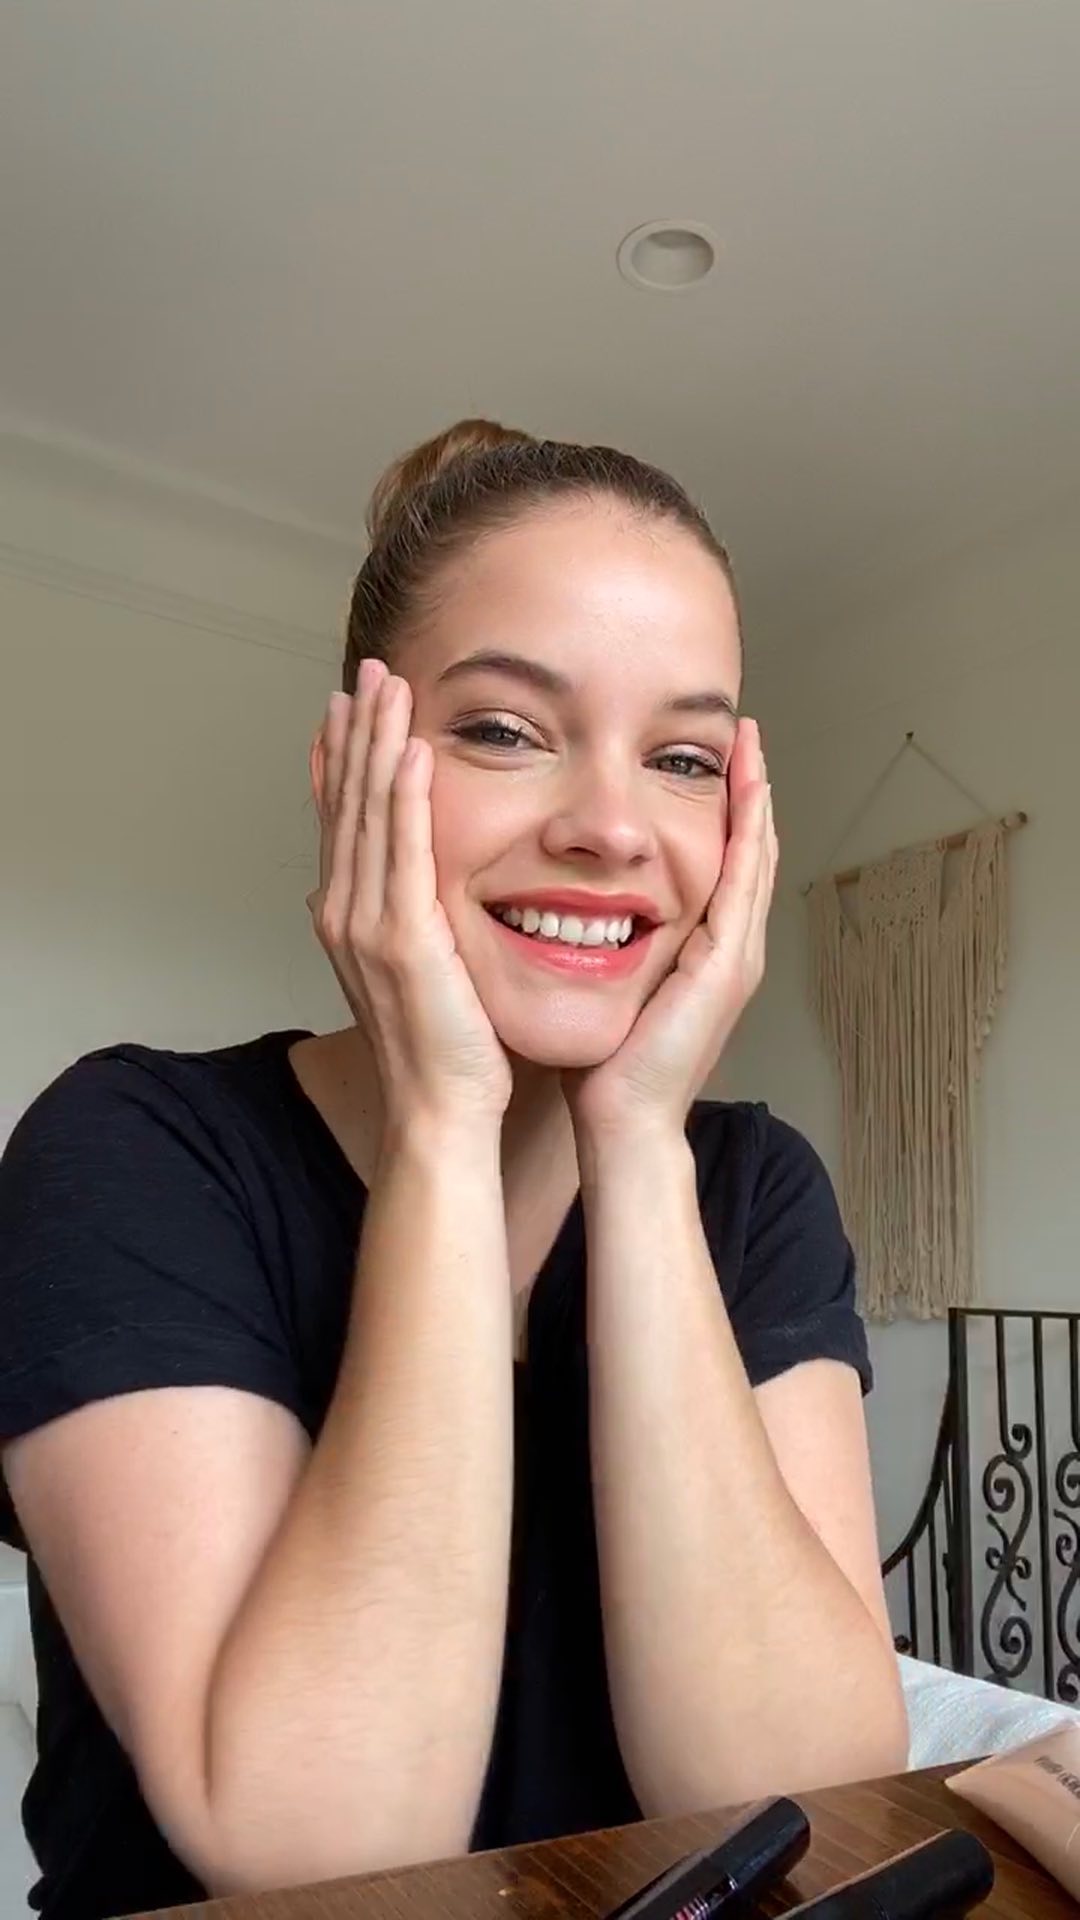 Armani beauty - From preparing the skin to applying the final touches of lip color, rediscover @RealBarbaraPalvin's feel-good beauty routine for a naturally glowing makeup look. 

Create the look:

CR...